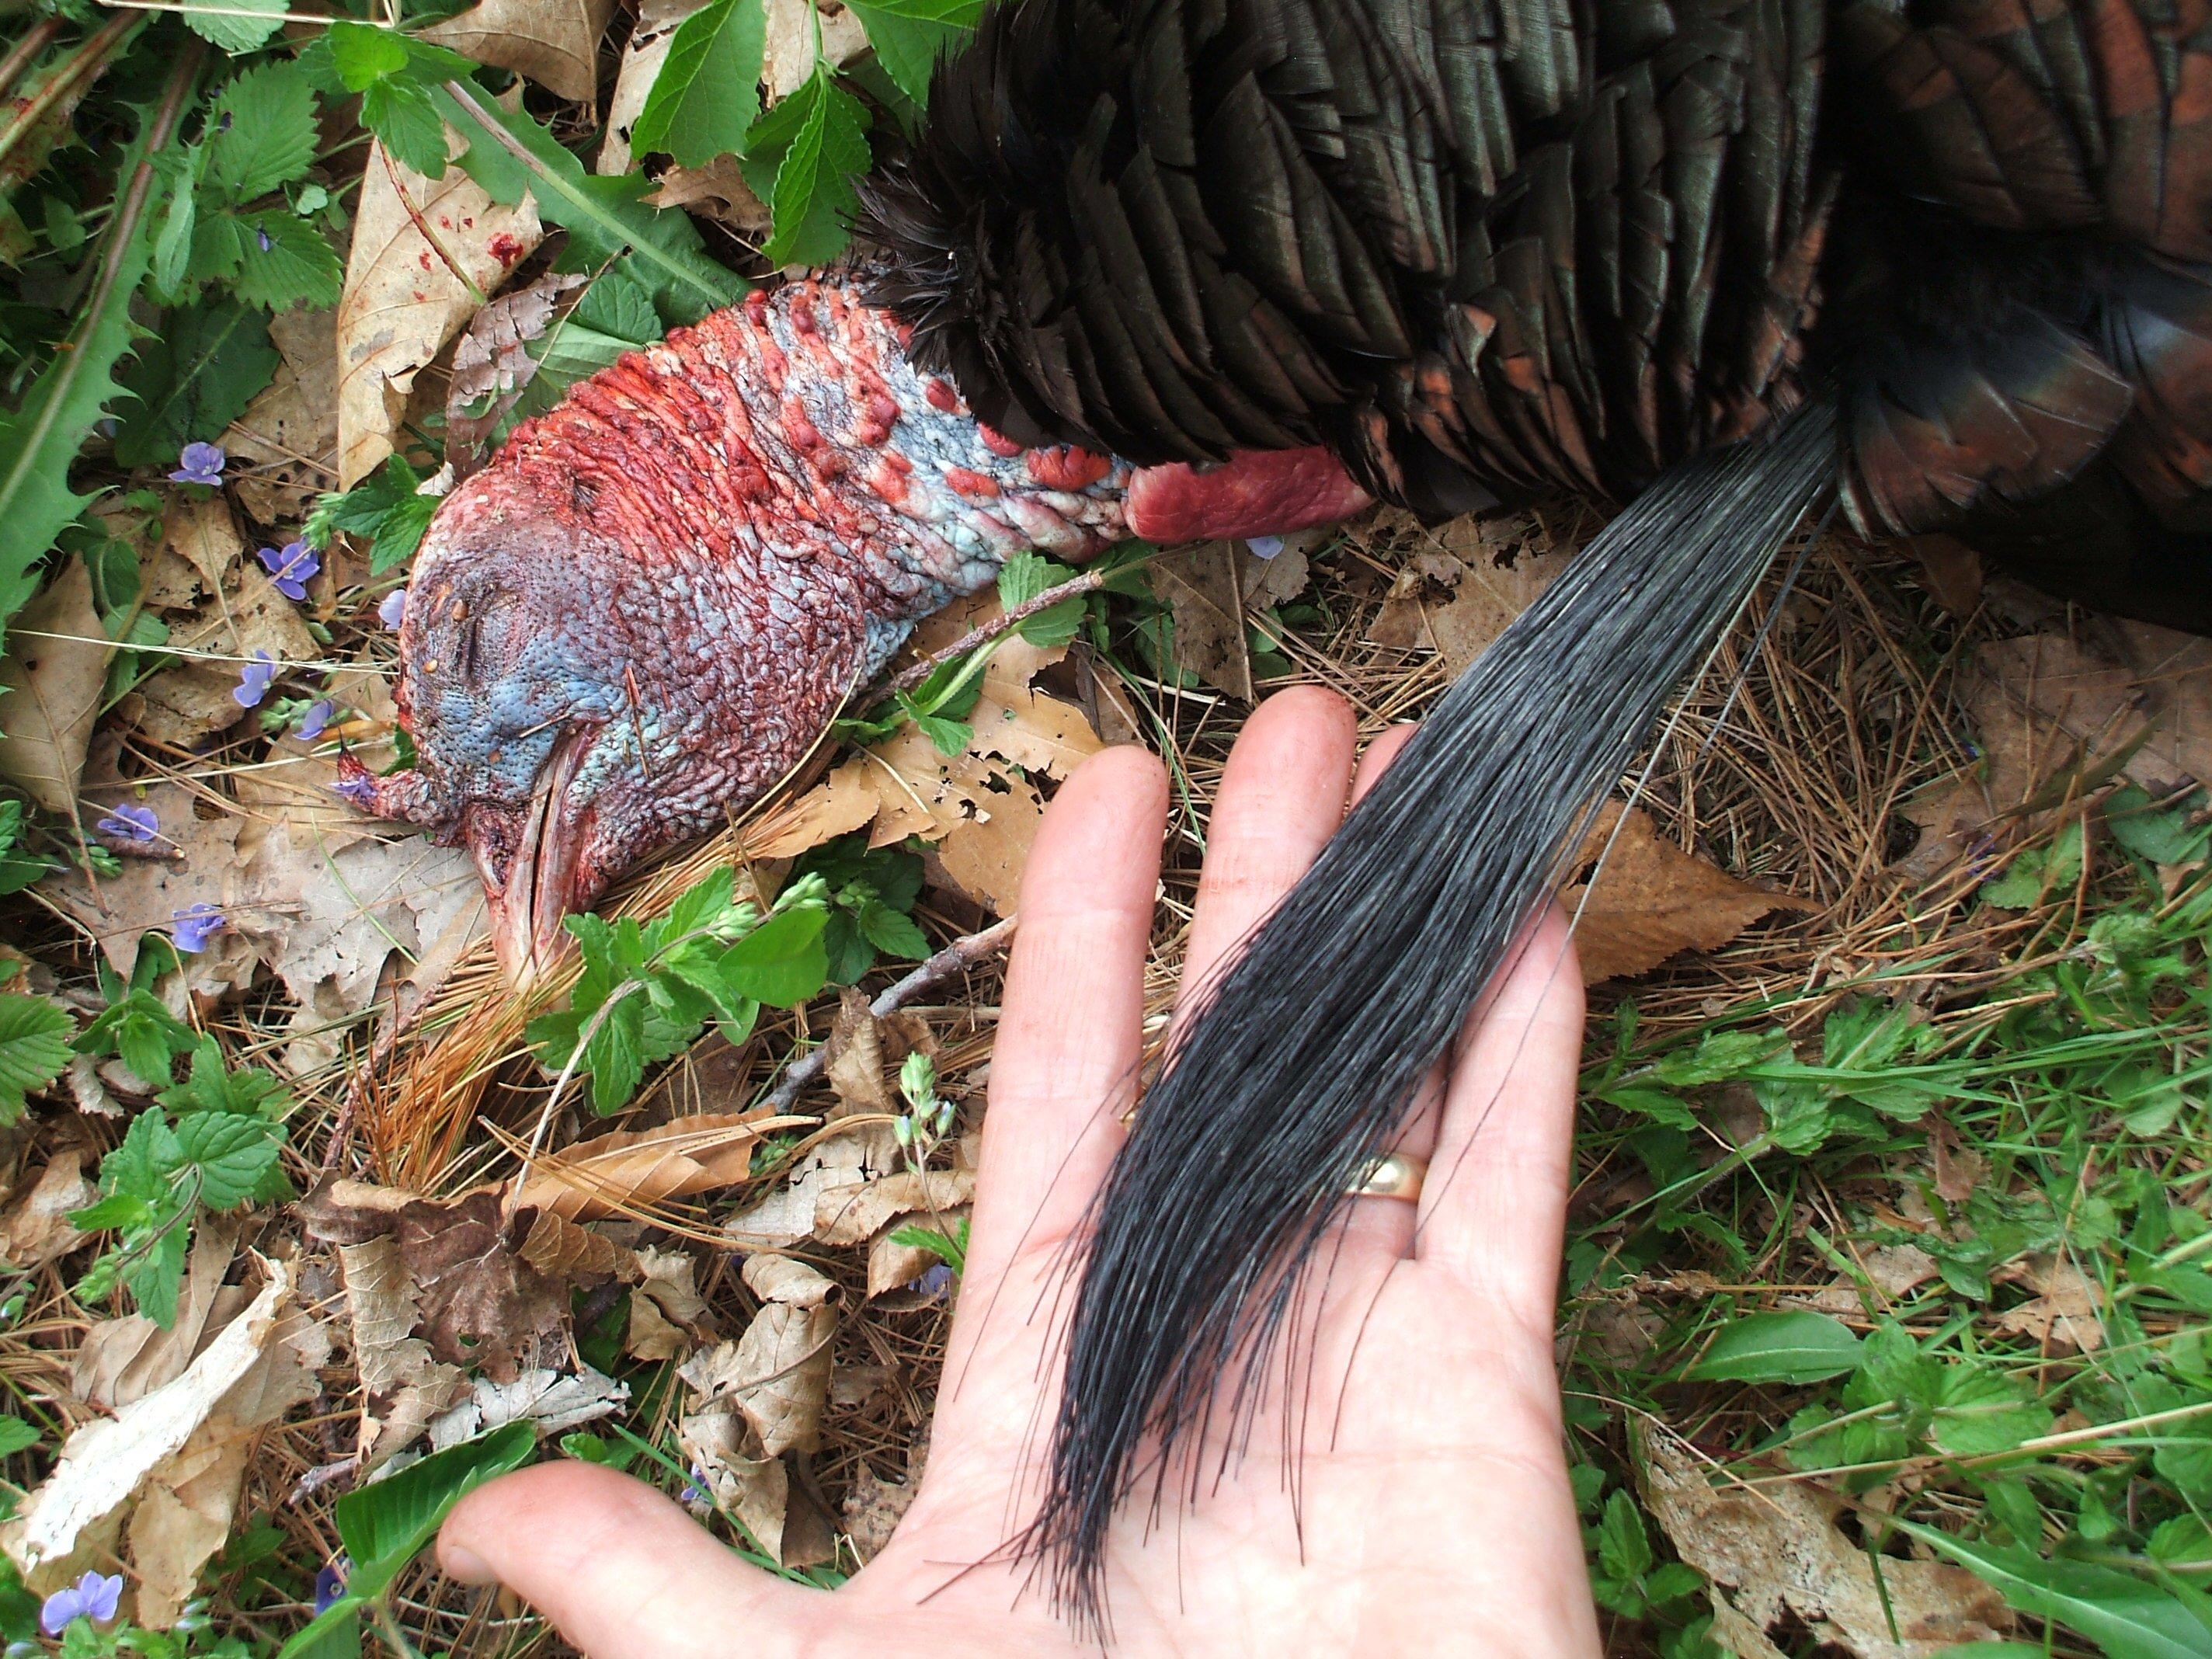 Turkey Hunting in Vermont. Image by Steve Hickoff 